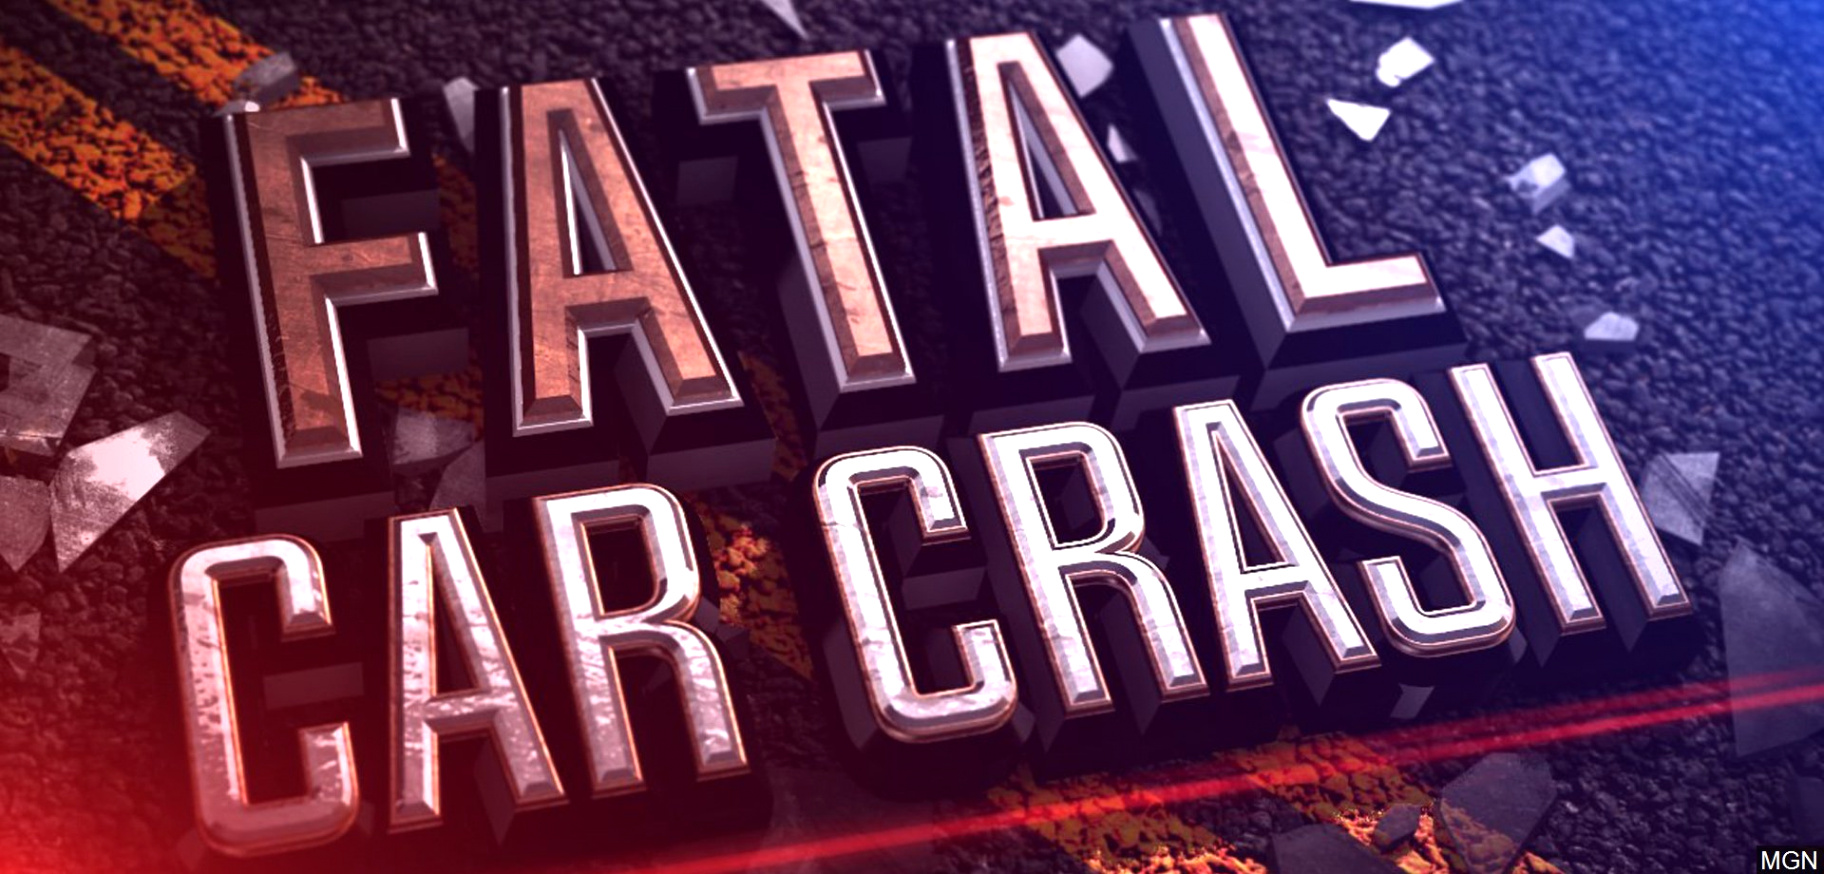 Fayette Tn Car Accident Lawyer Dans northport Man Dies In Fayette County Wreck Wednesday - Wvua 23